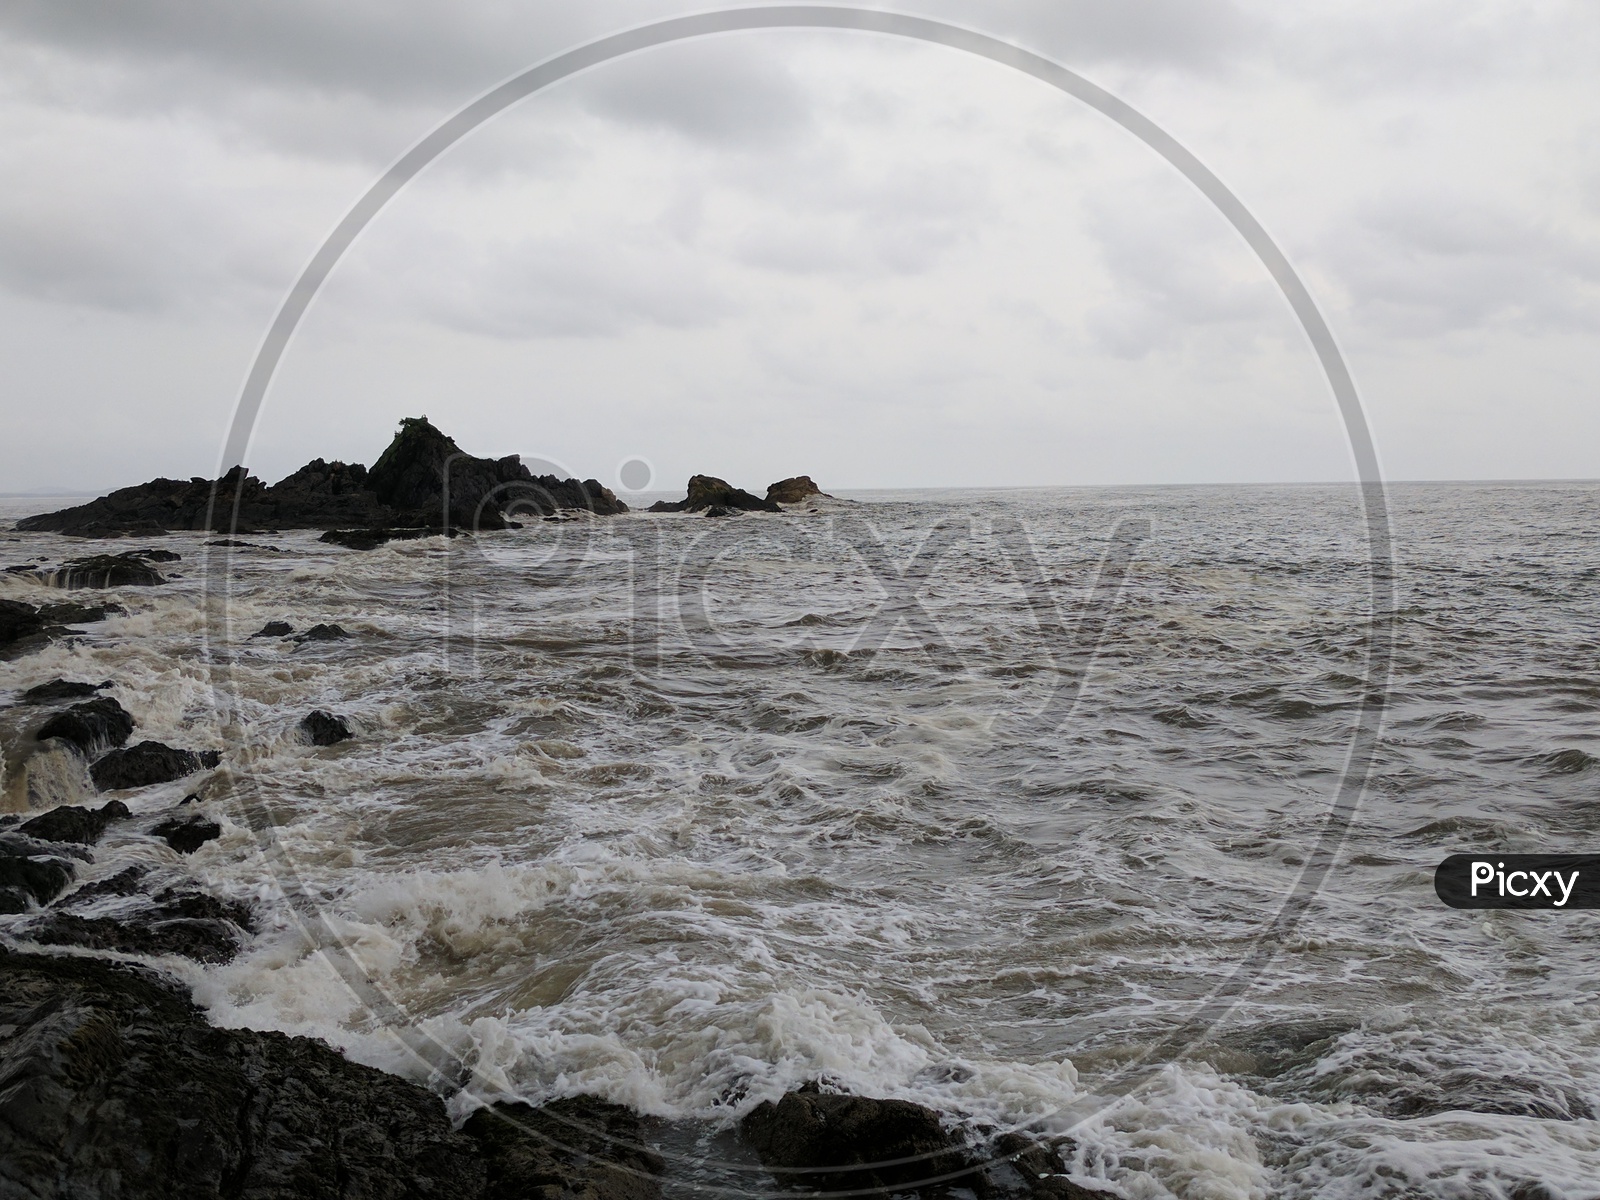 A View of Black Stones In Sea and The Waves Touching Those Stones Composition Shot